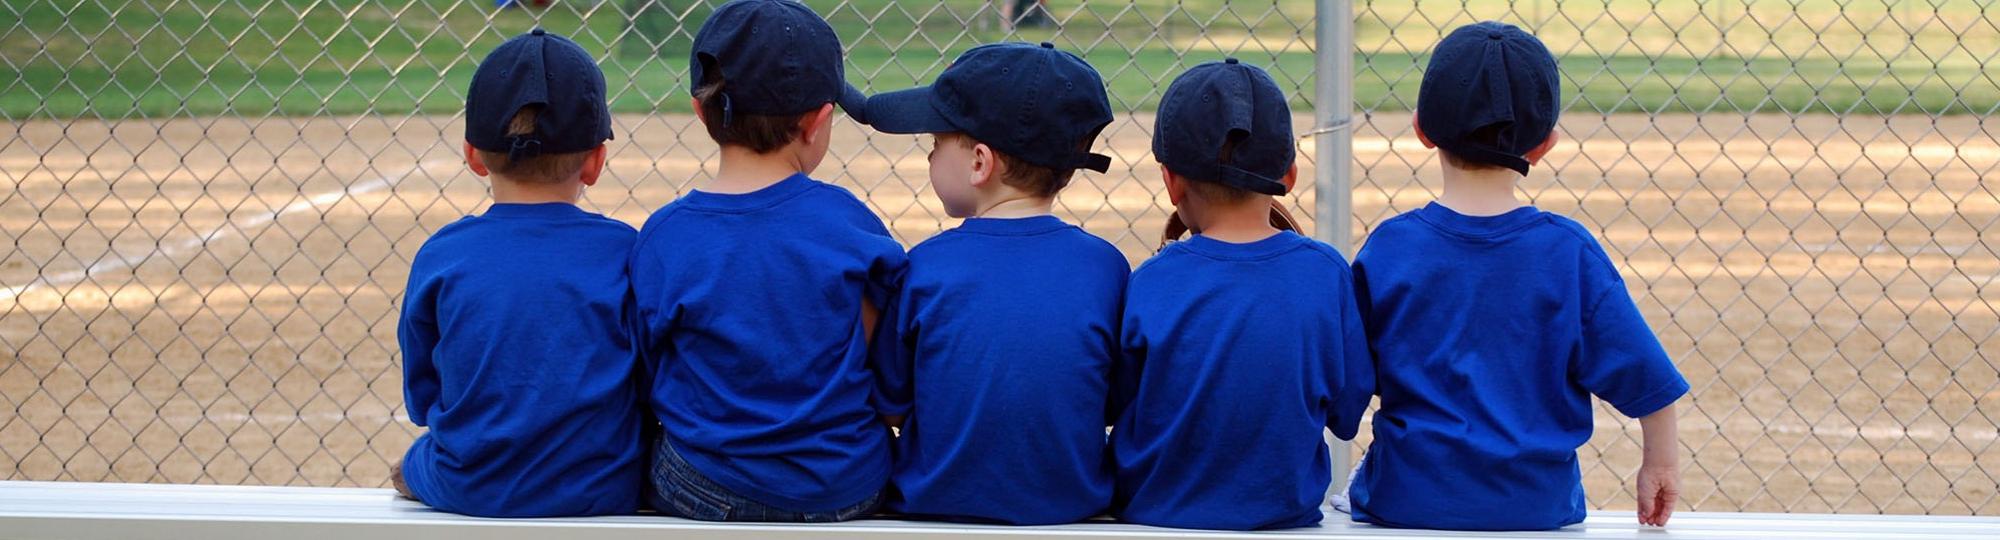 Rear view of a row of kids in blue baseball caps and T-shirts sitting on a bench at a ballfield